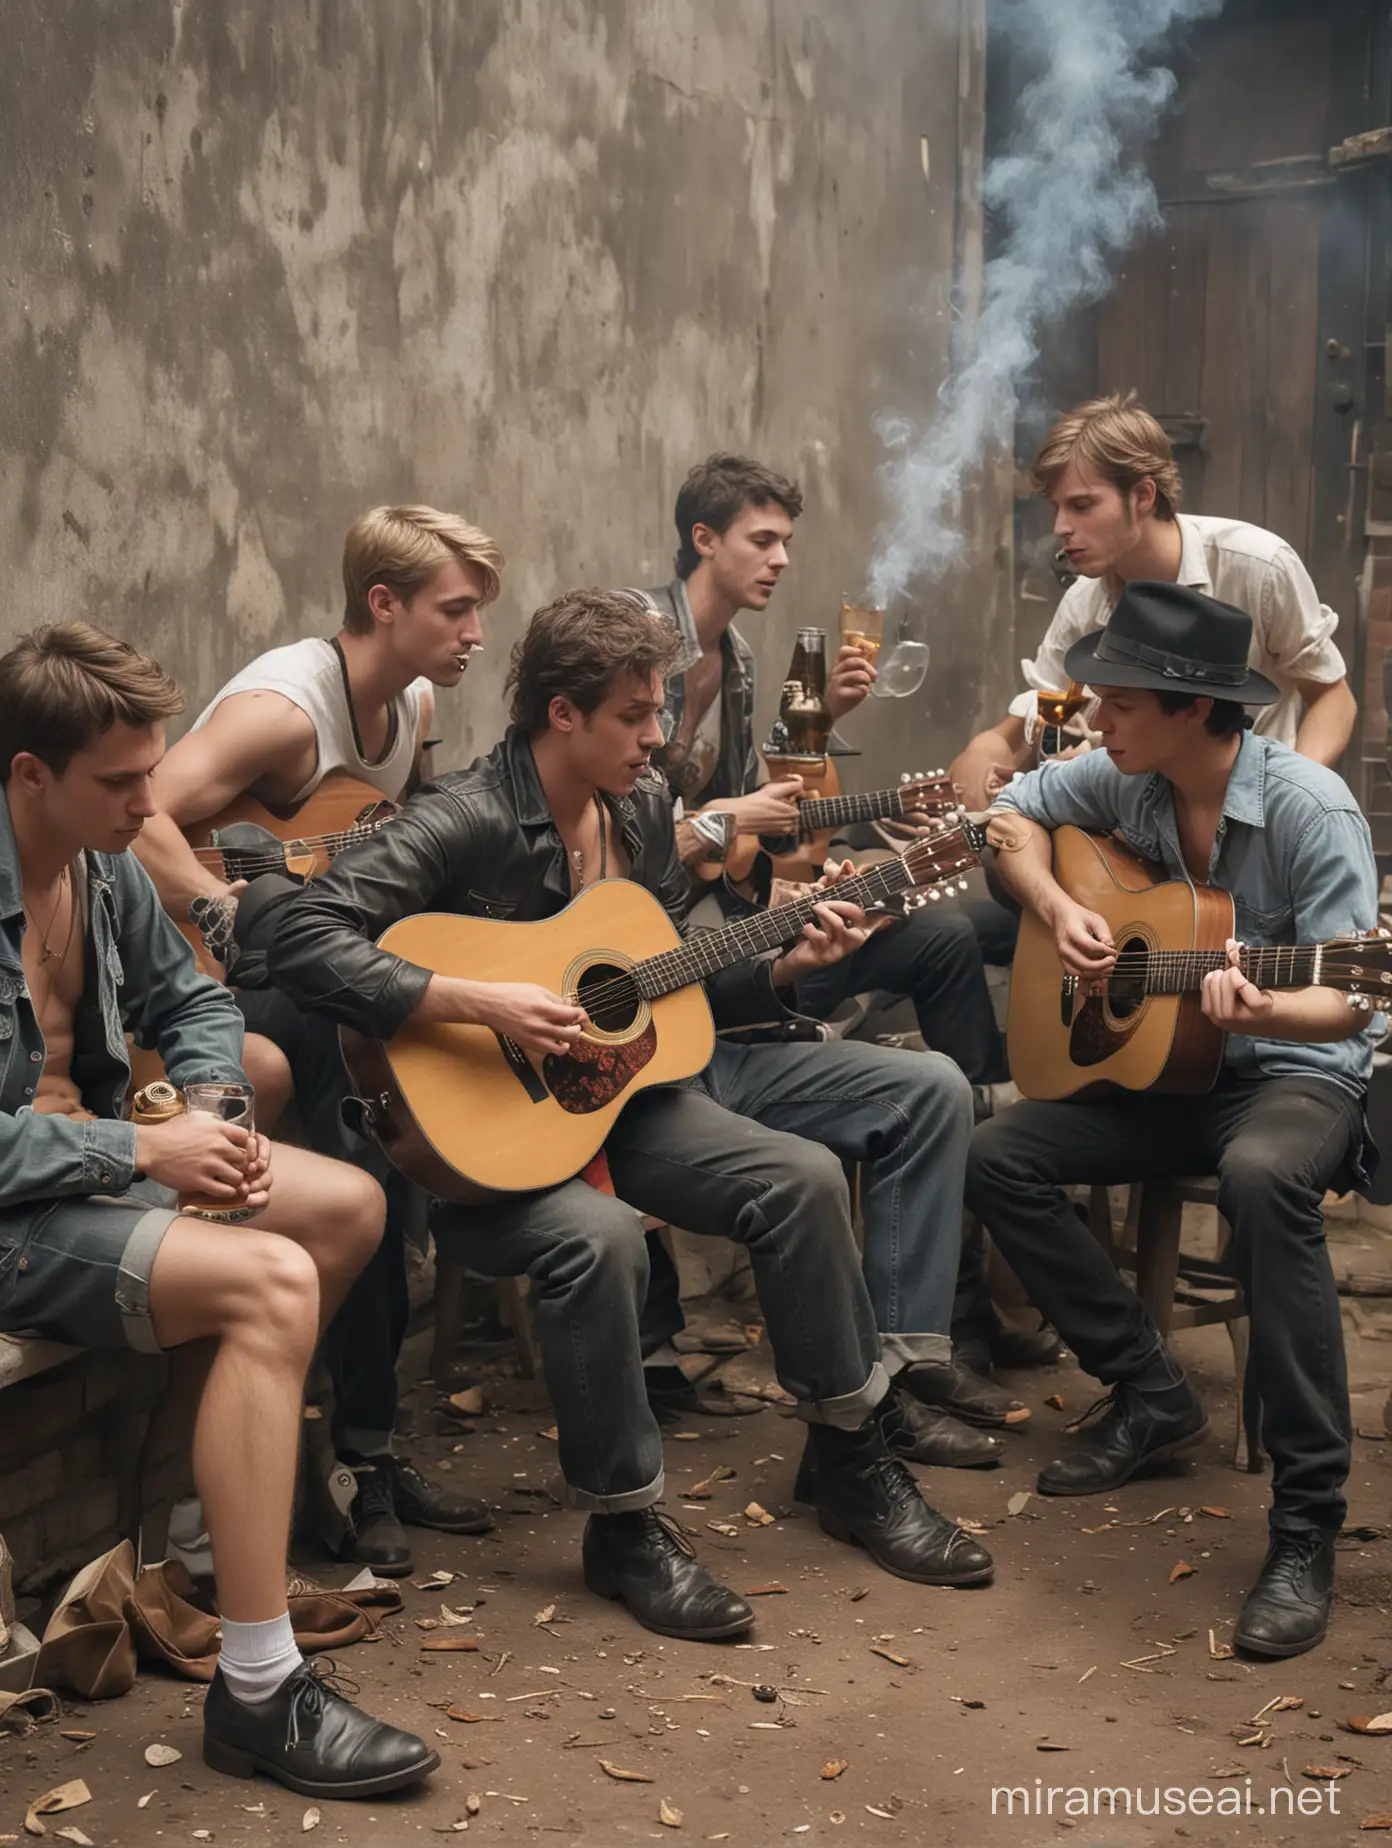 Young Men Playing Guitar Drinking Beer and Smoking with a Rooster